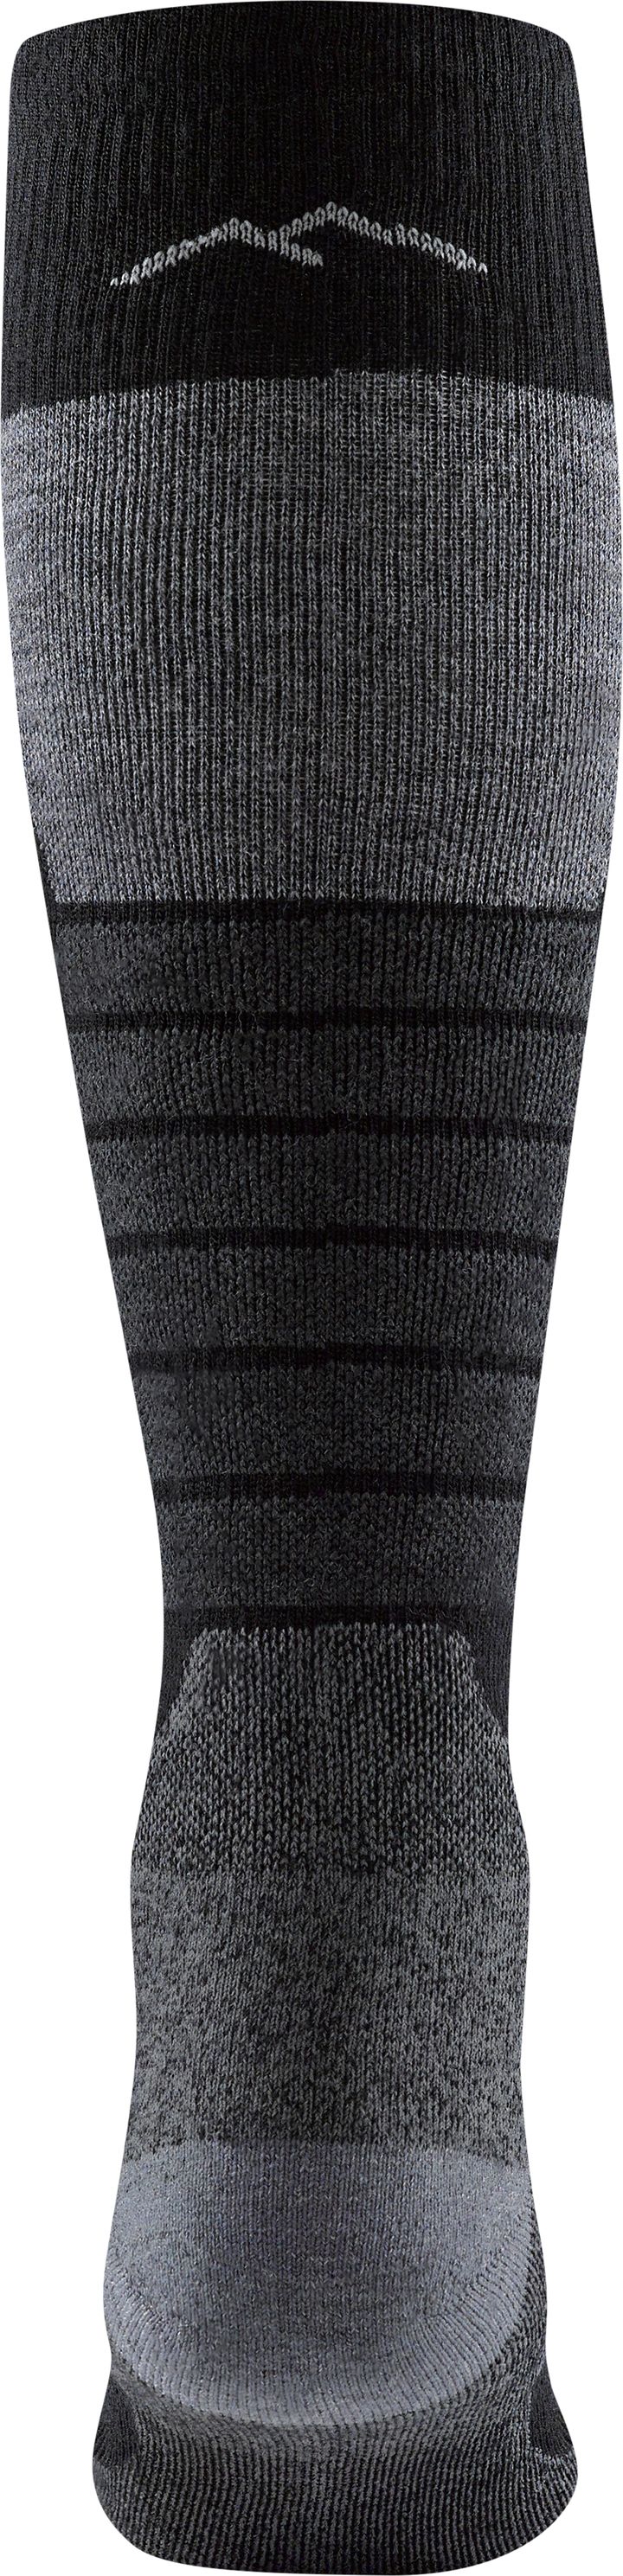 Men's Function X Over-the-Calf Midweight Sock with Cushion Black Darn Tough